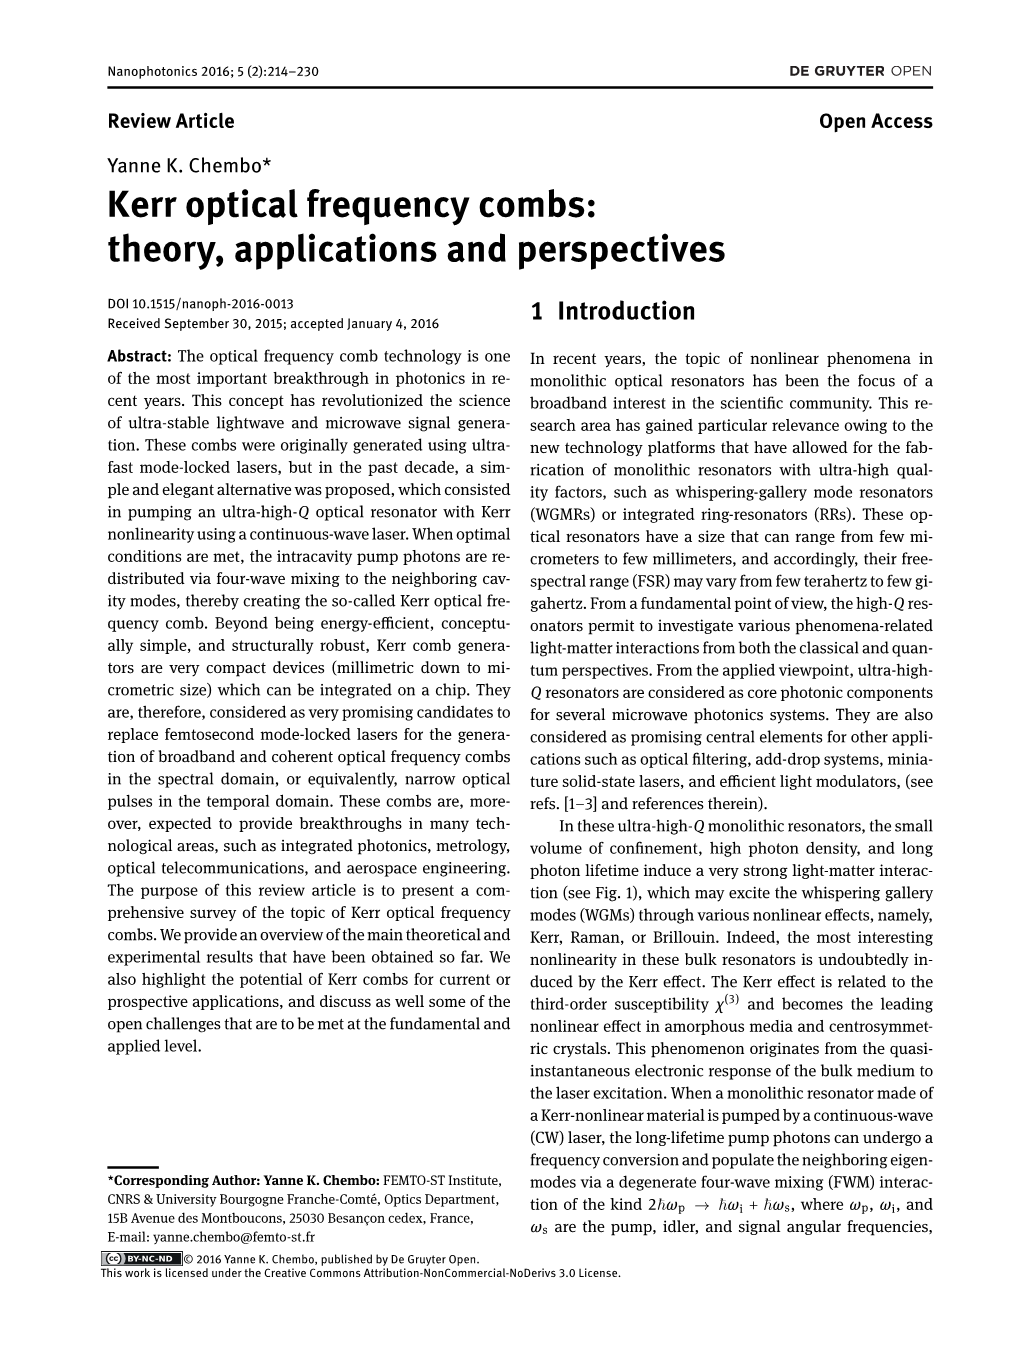 Kerr Optical Frequency Combs: Theory, Applications and Perspectives